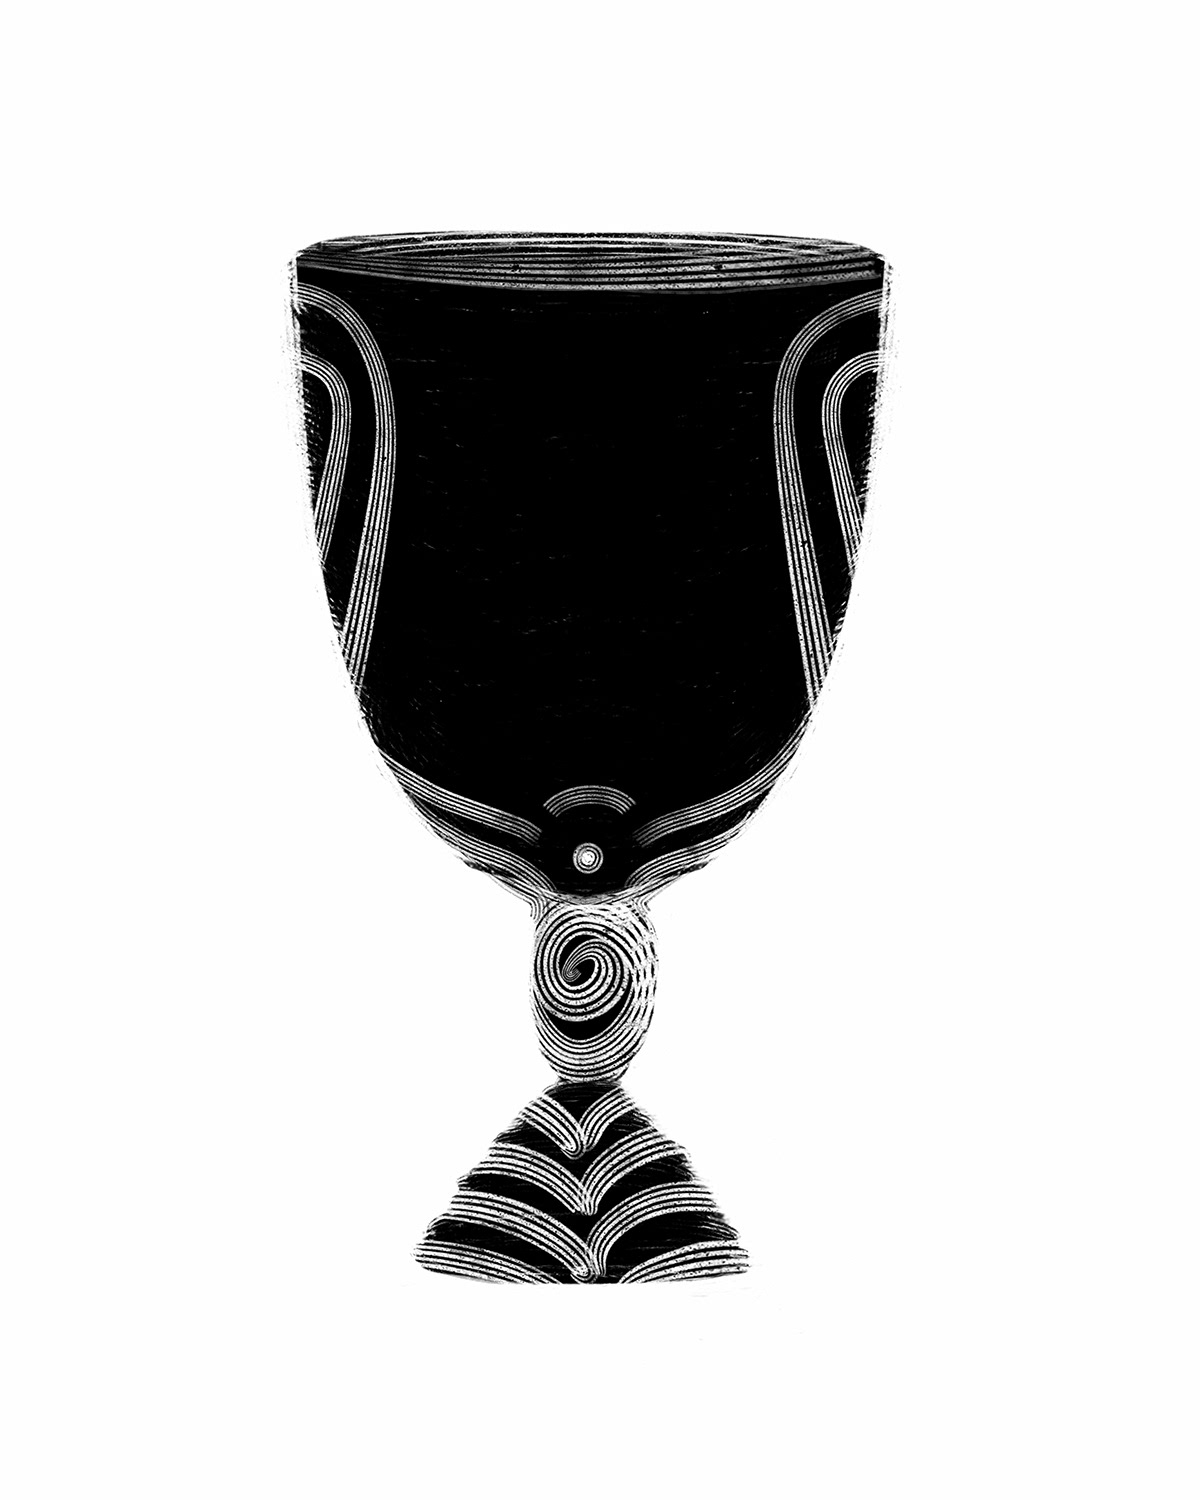 illustration of a black and white cup by chris corridore